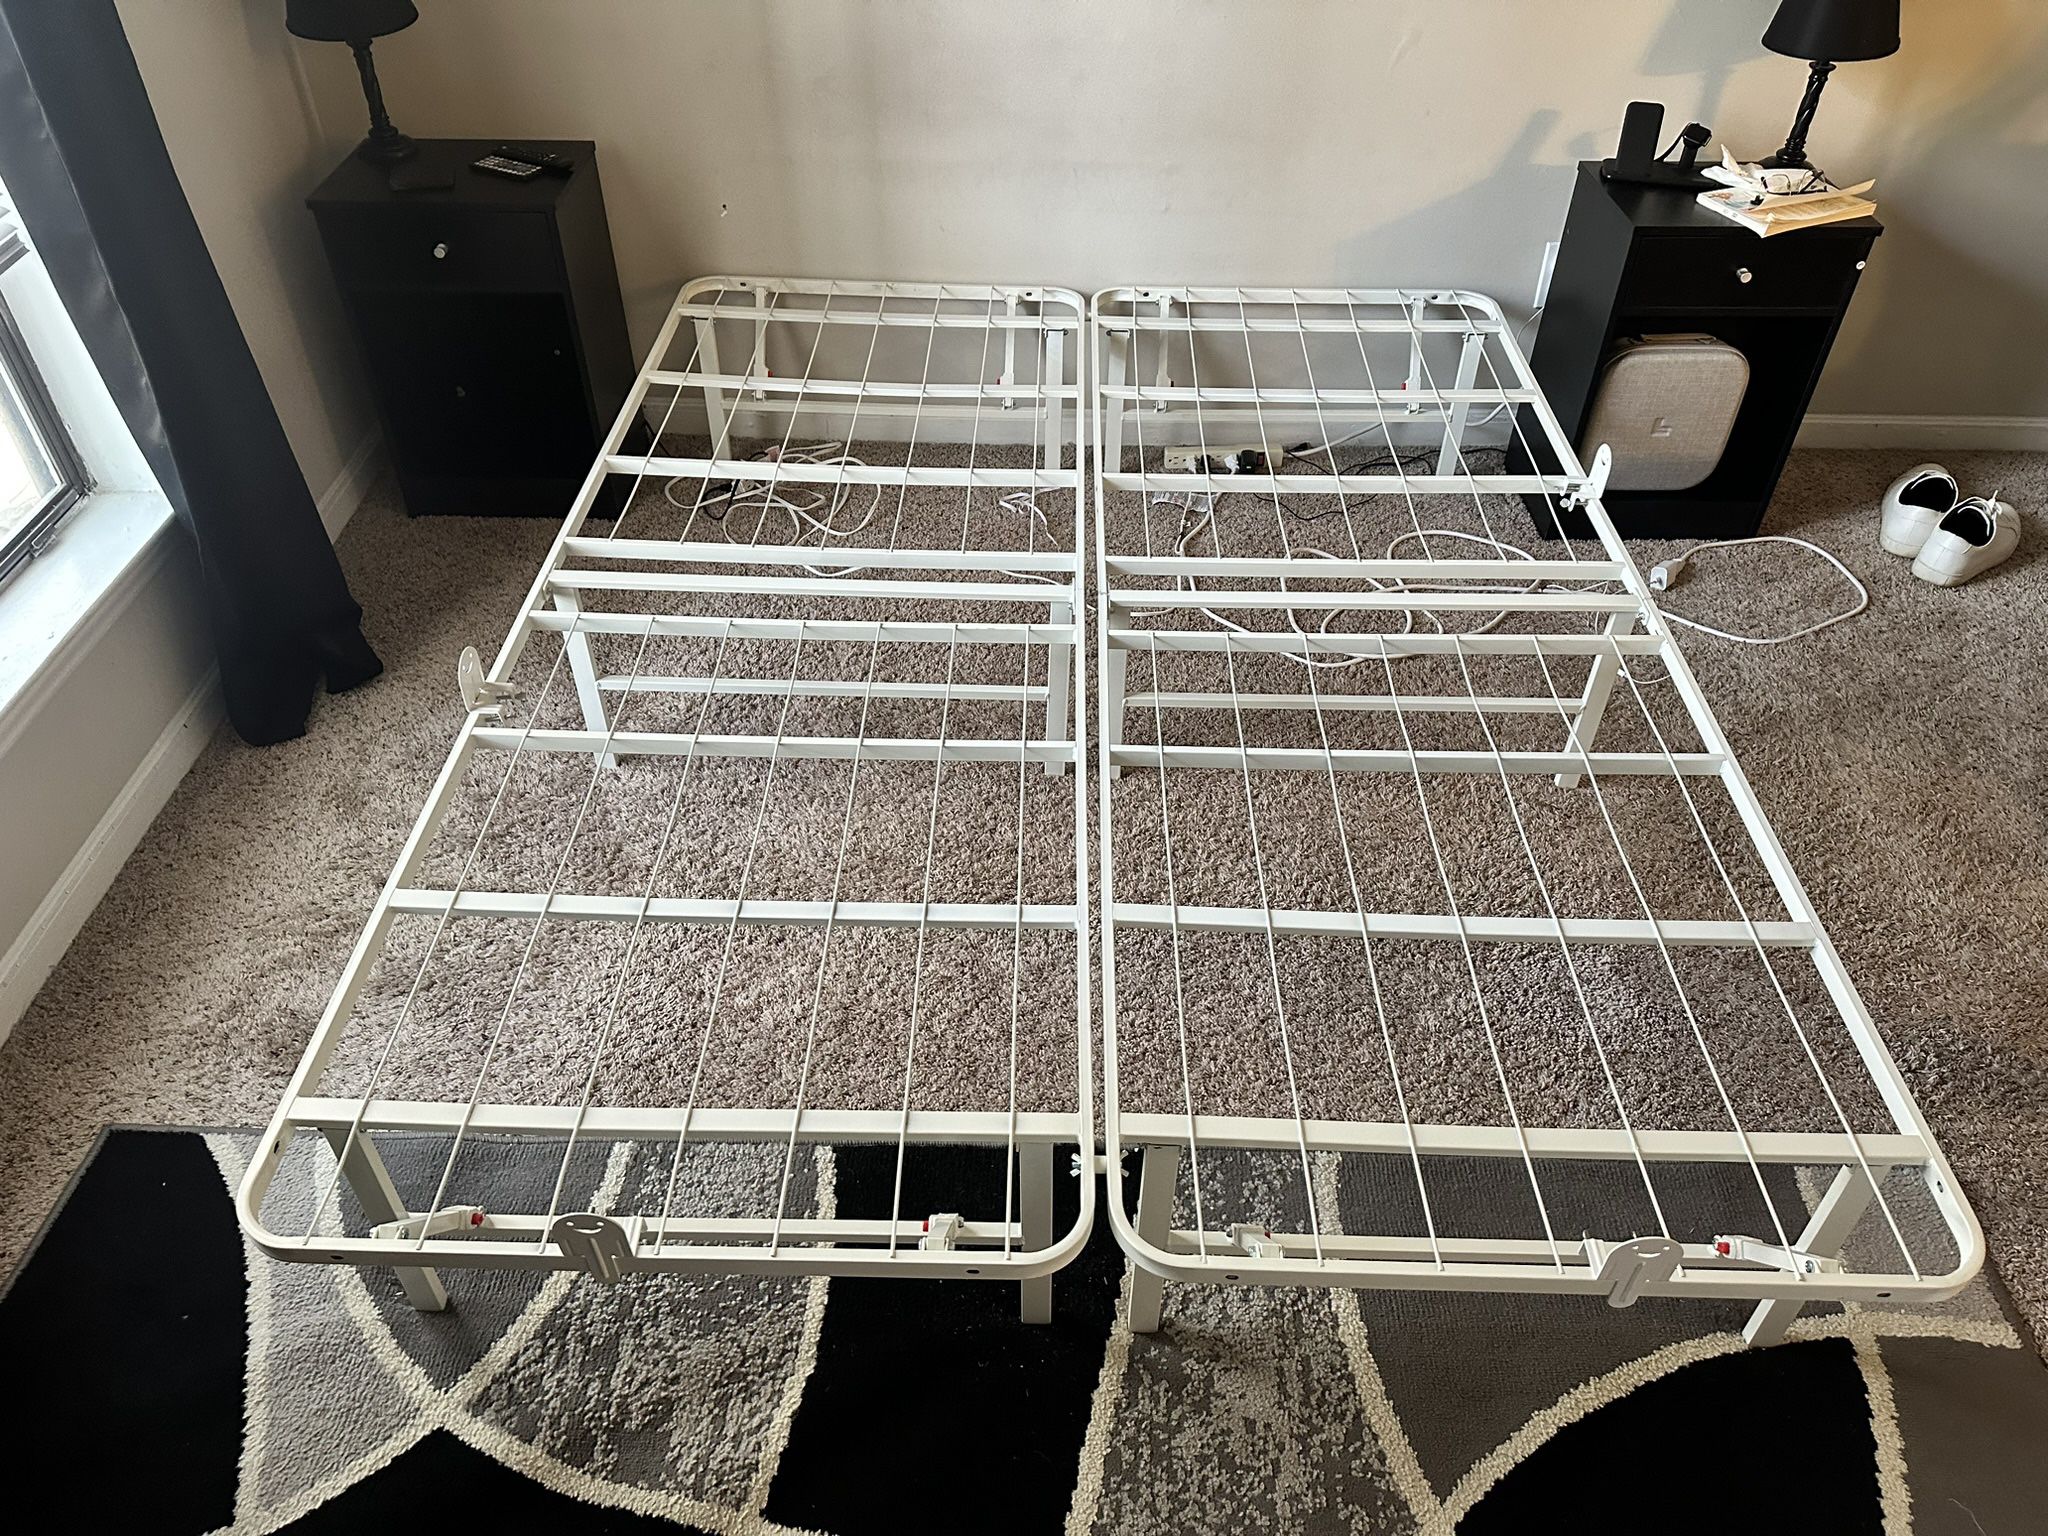 Twin or Queen Bed Frame